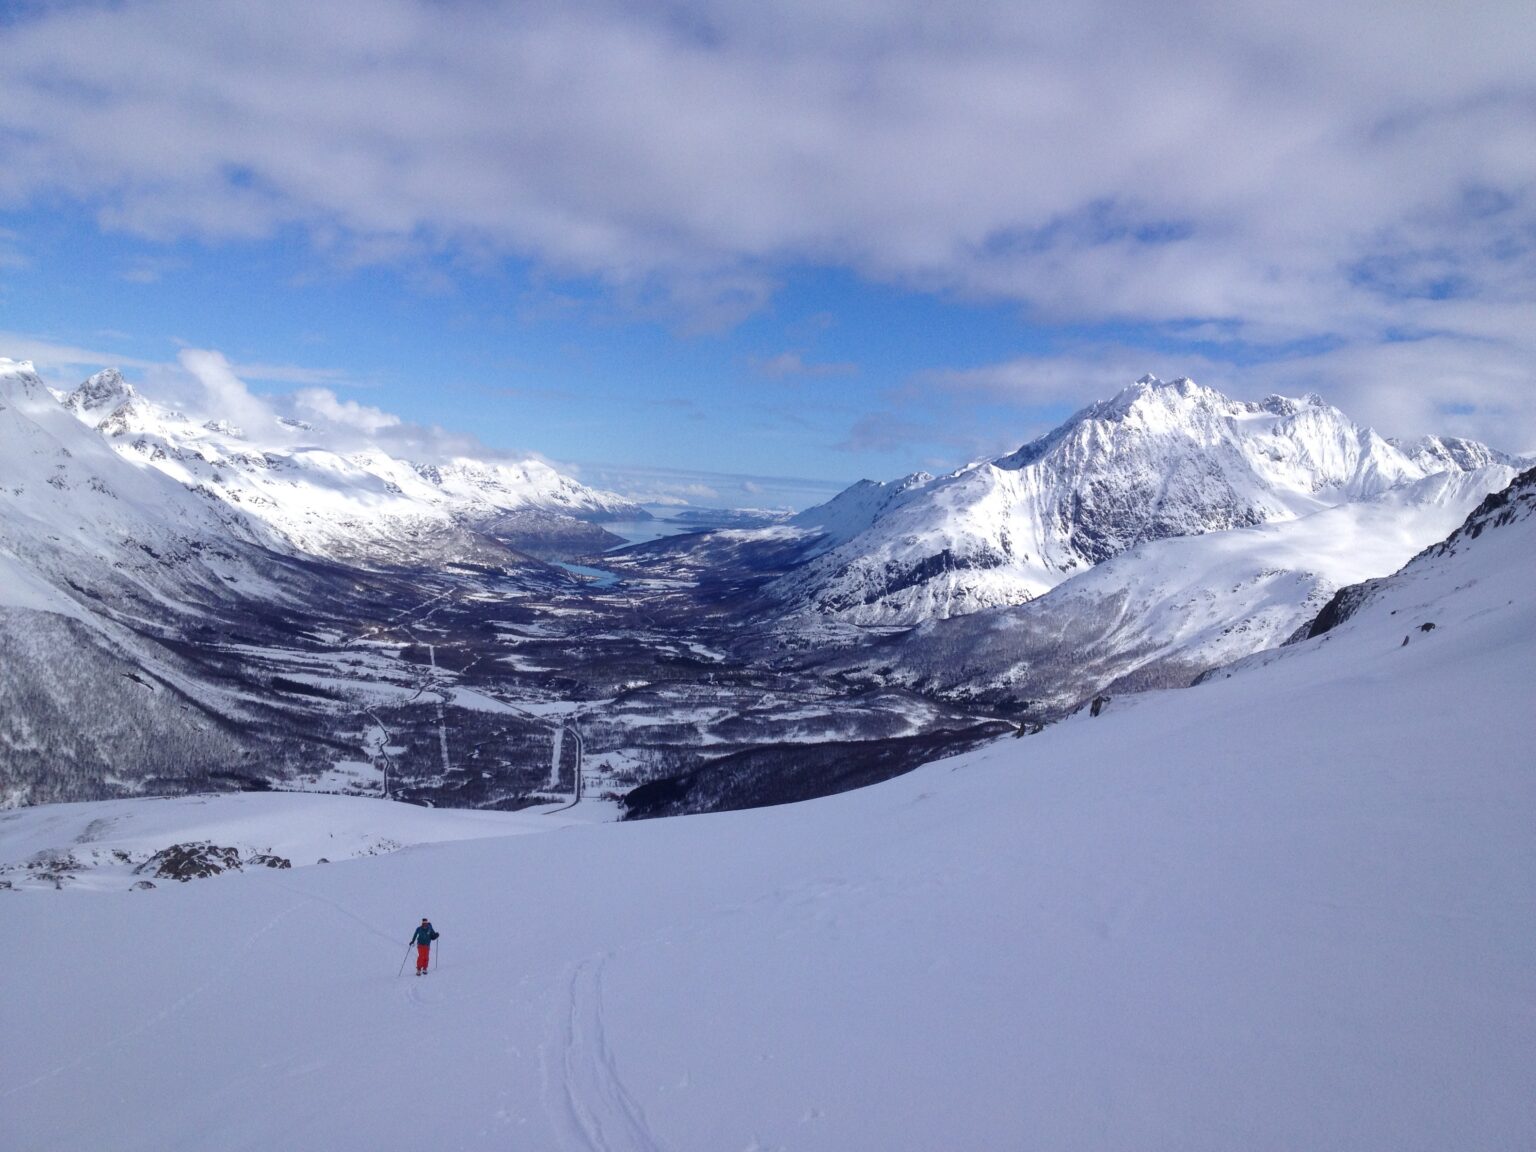 Ski touring with the Lakseldalen Valley in the distance